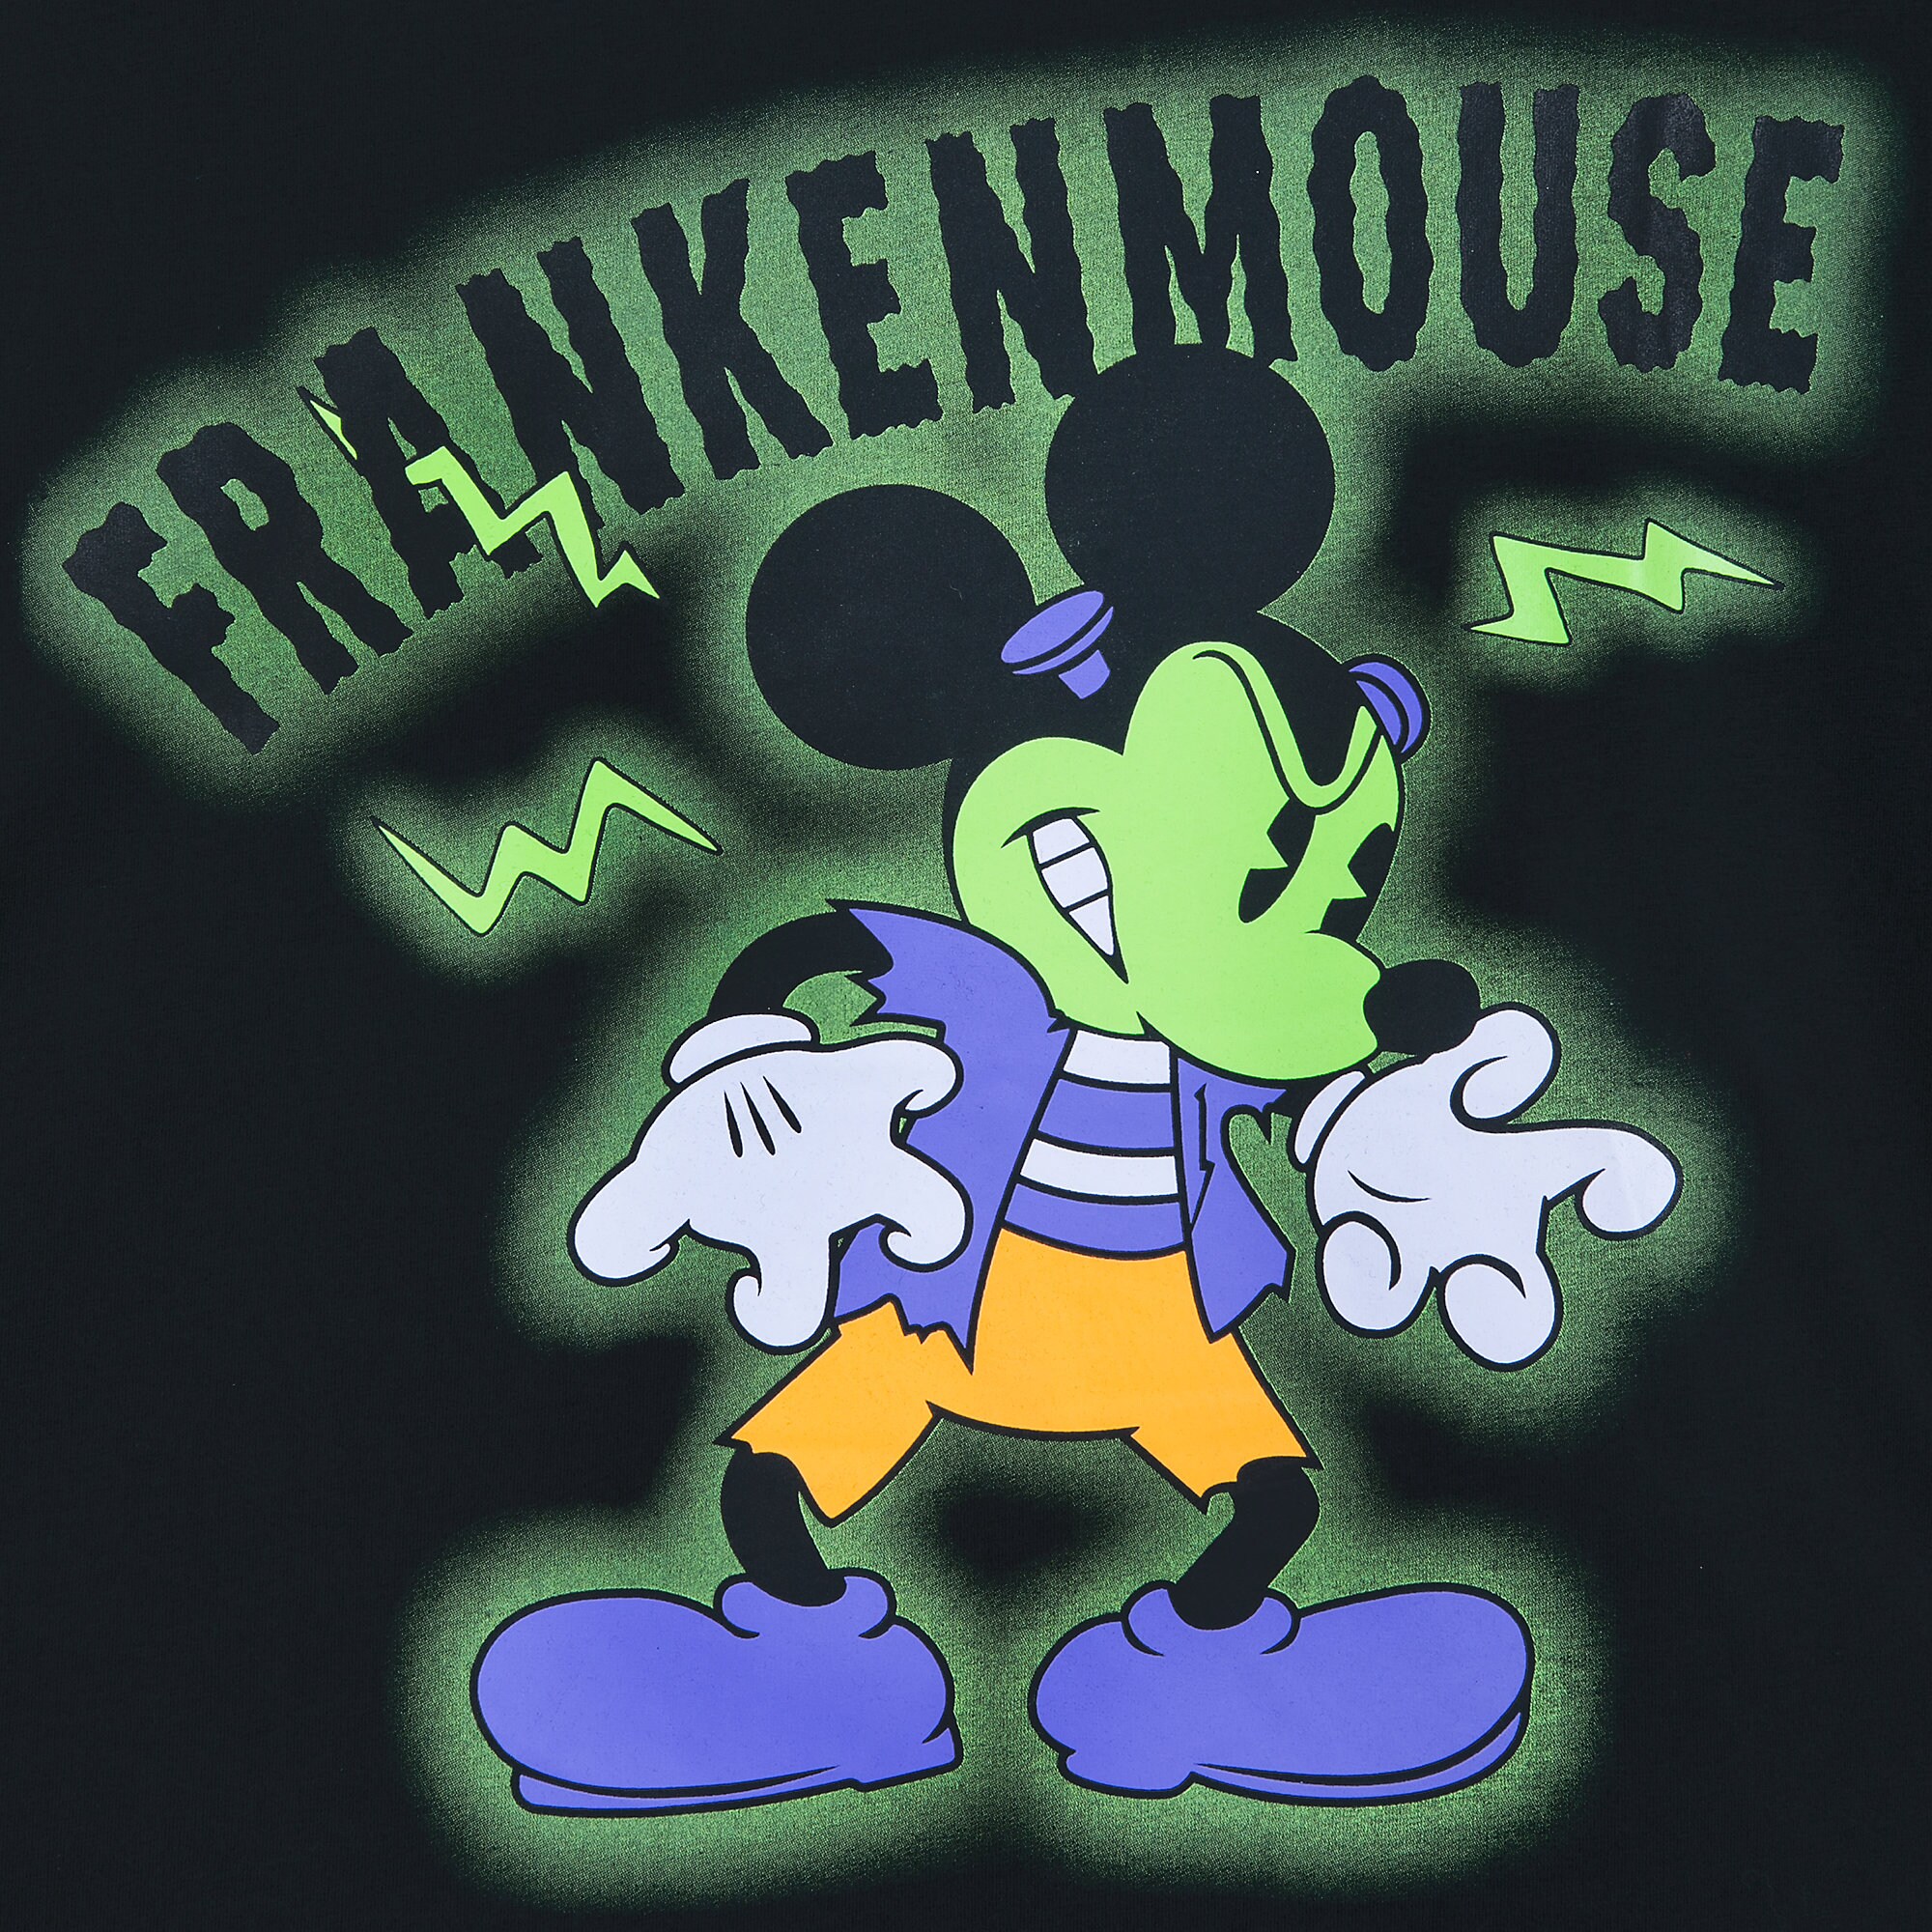 Mickey Mouse Halloween T-Shirt for Men